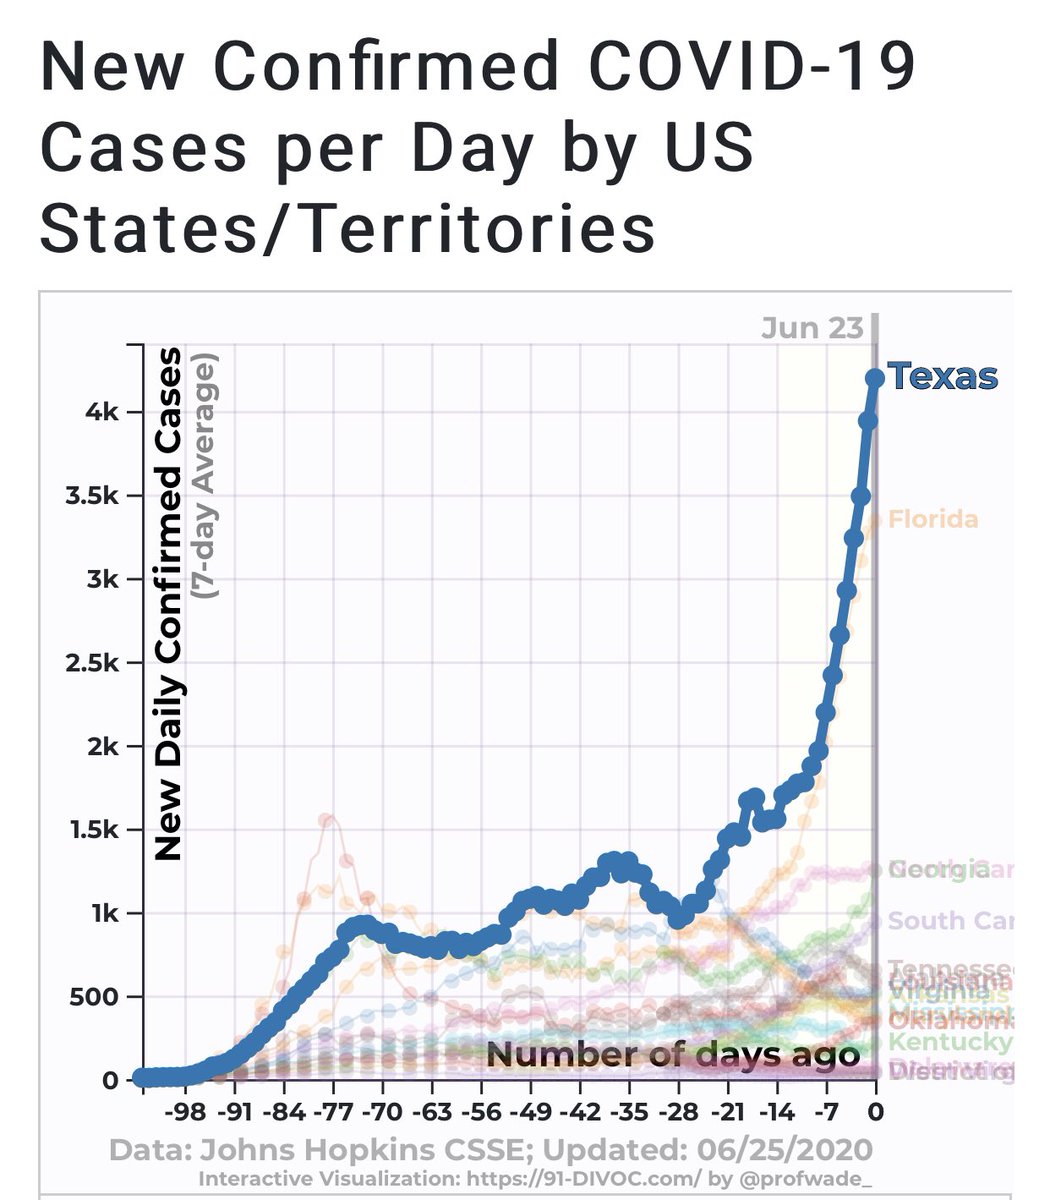 On the other hand, places in the US that are active now look very different. Yet to peak. And we don’t know how high the peak will be. Or how long it will last. Or how many lives will be lost. 4/